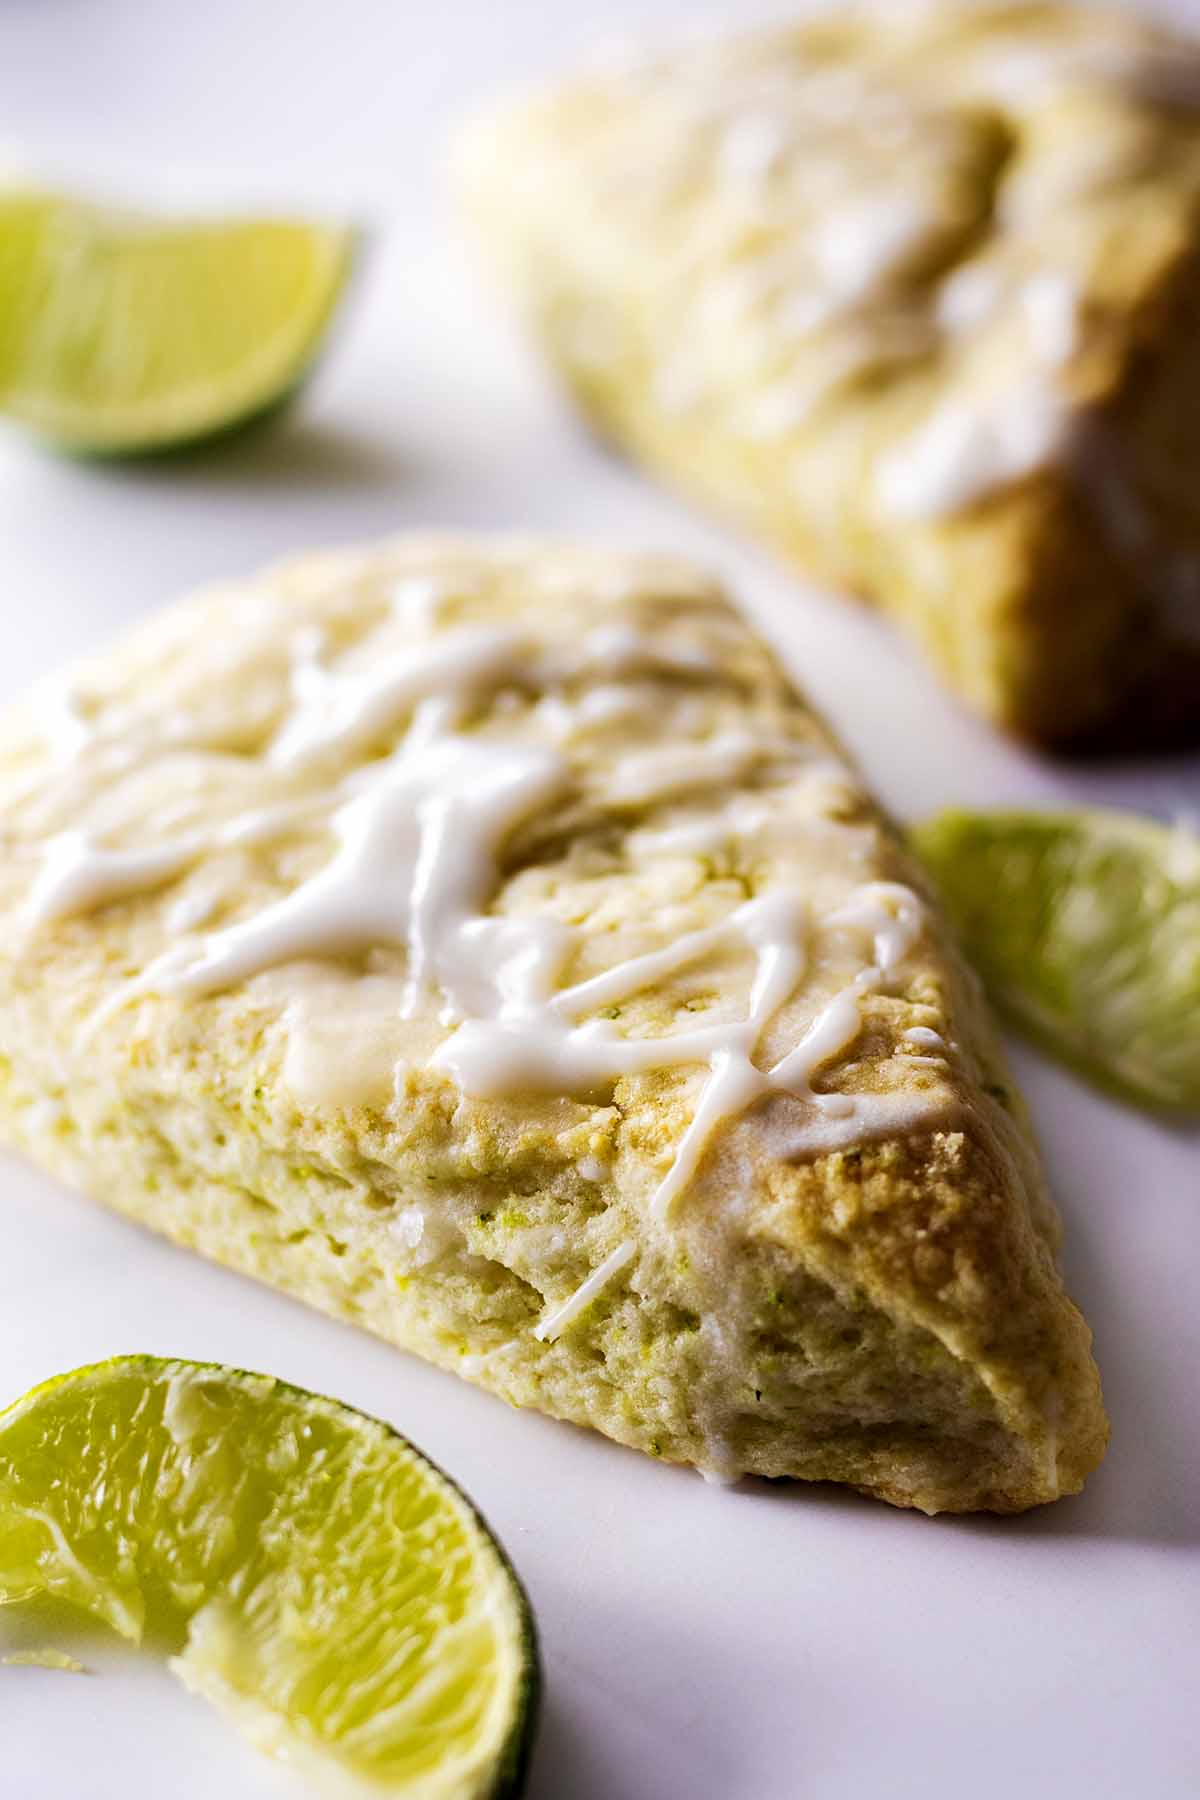 Baked and glazed lime scones with lime wedges